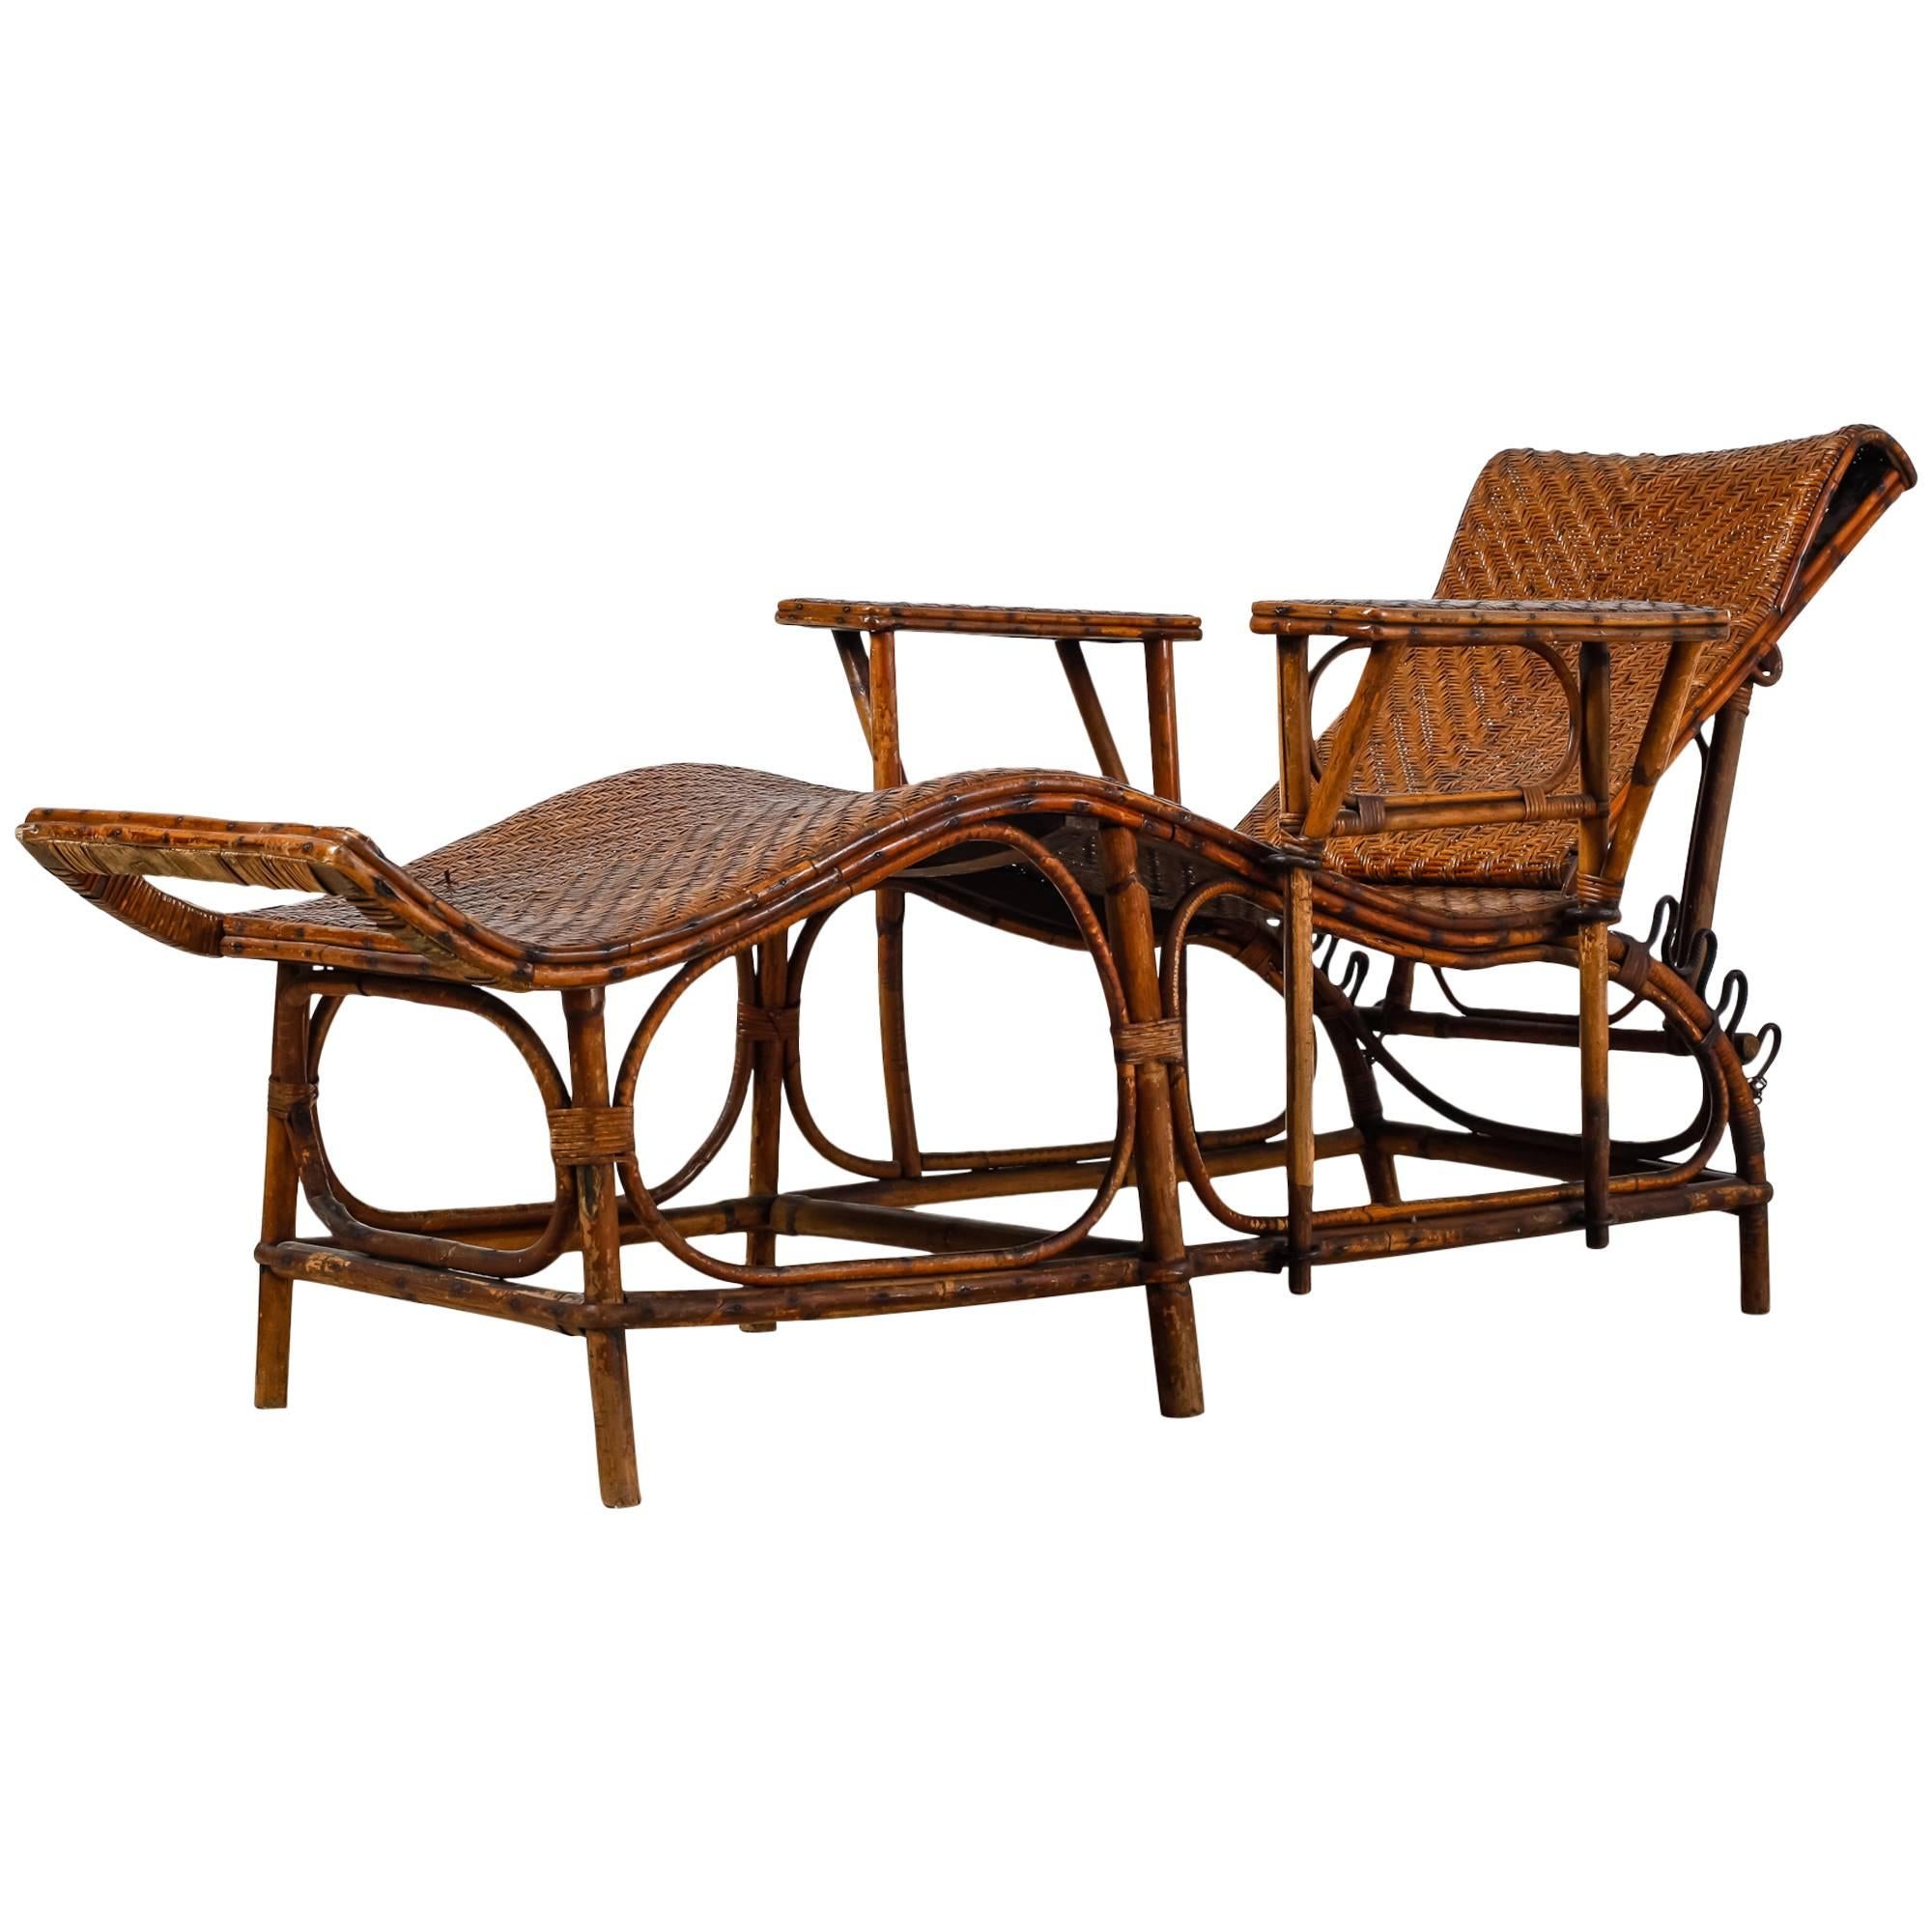 Adjustable Bamboo and Rattan Garden Chaise, Germany, 1920s-1930s For Sale